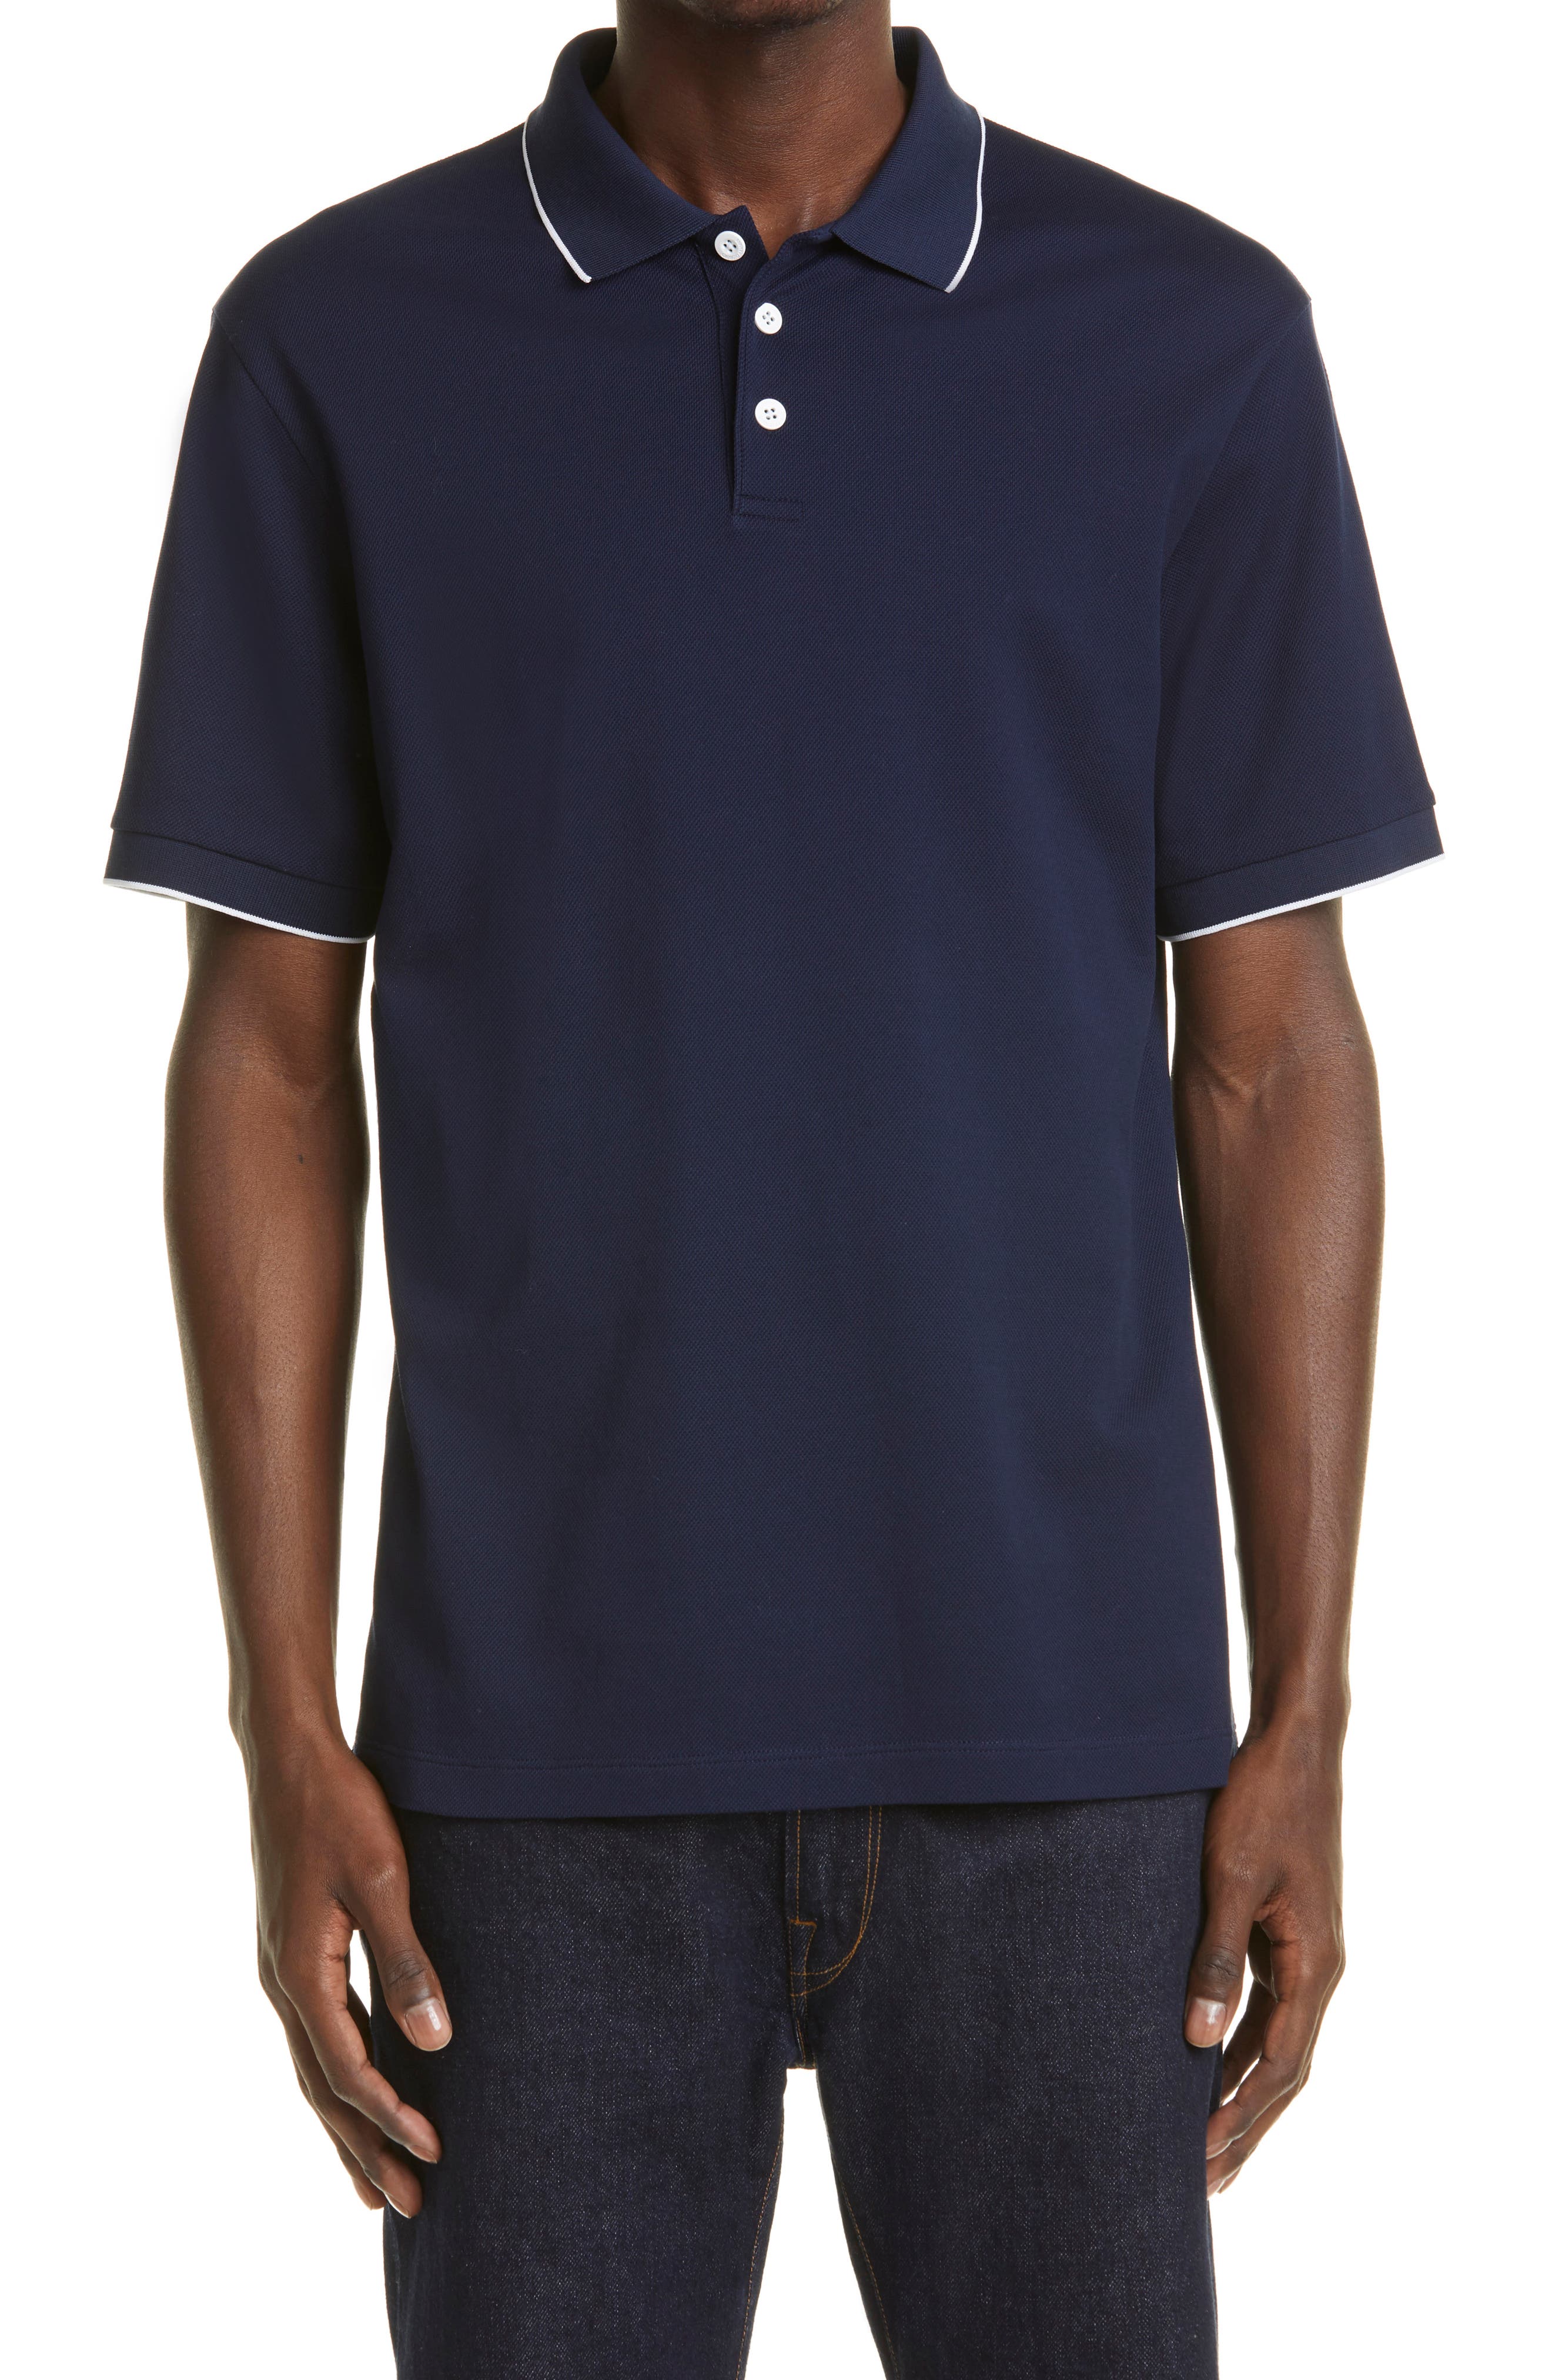 Giorgio Armani Tipped Short Sleeve Cotton Polo in Navy/White at Nordstrom, Size 44 Us